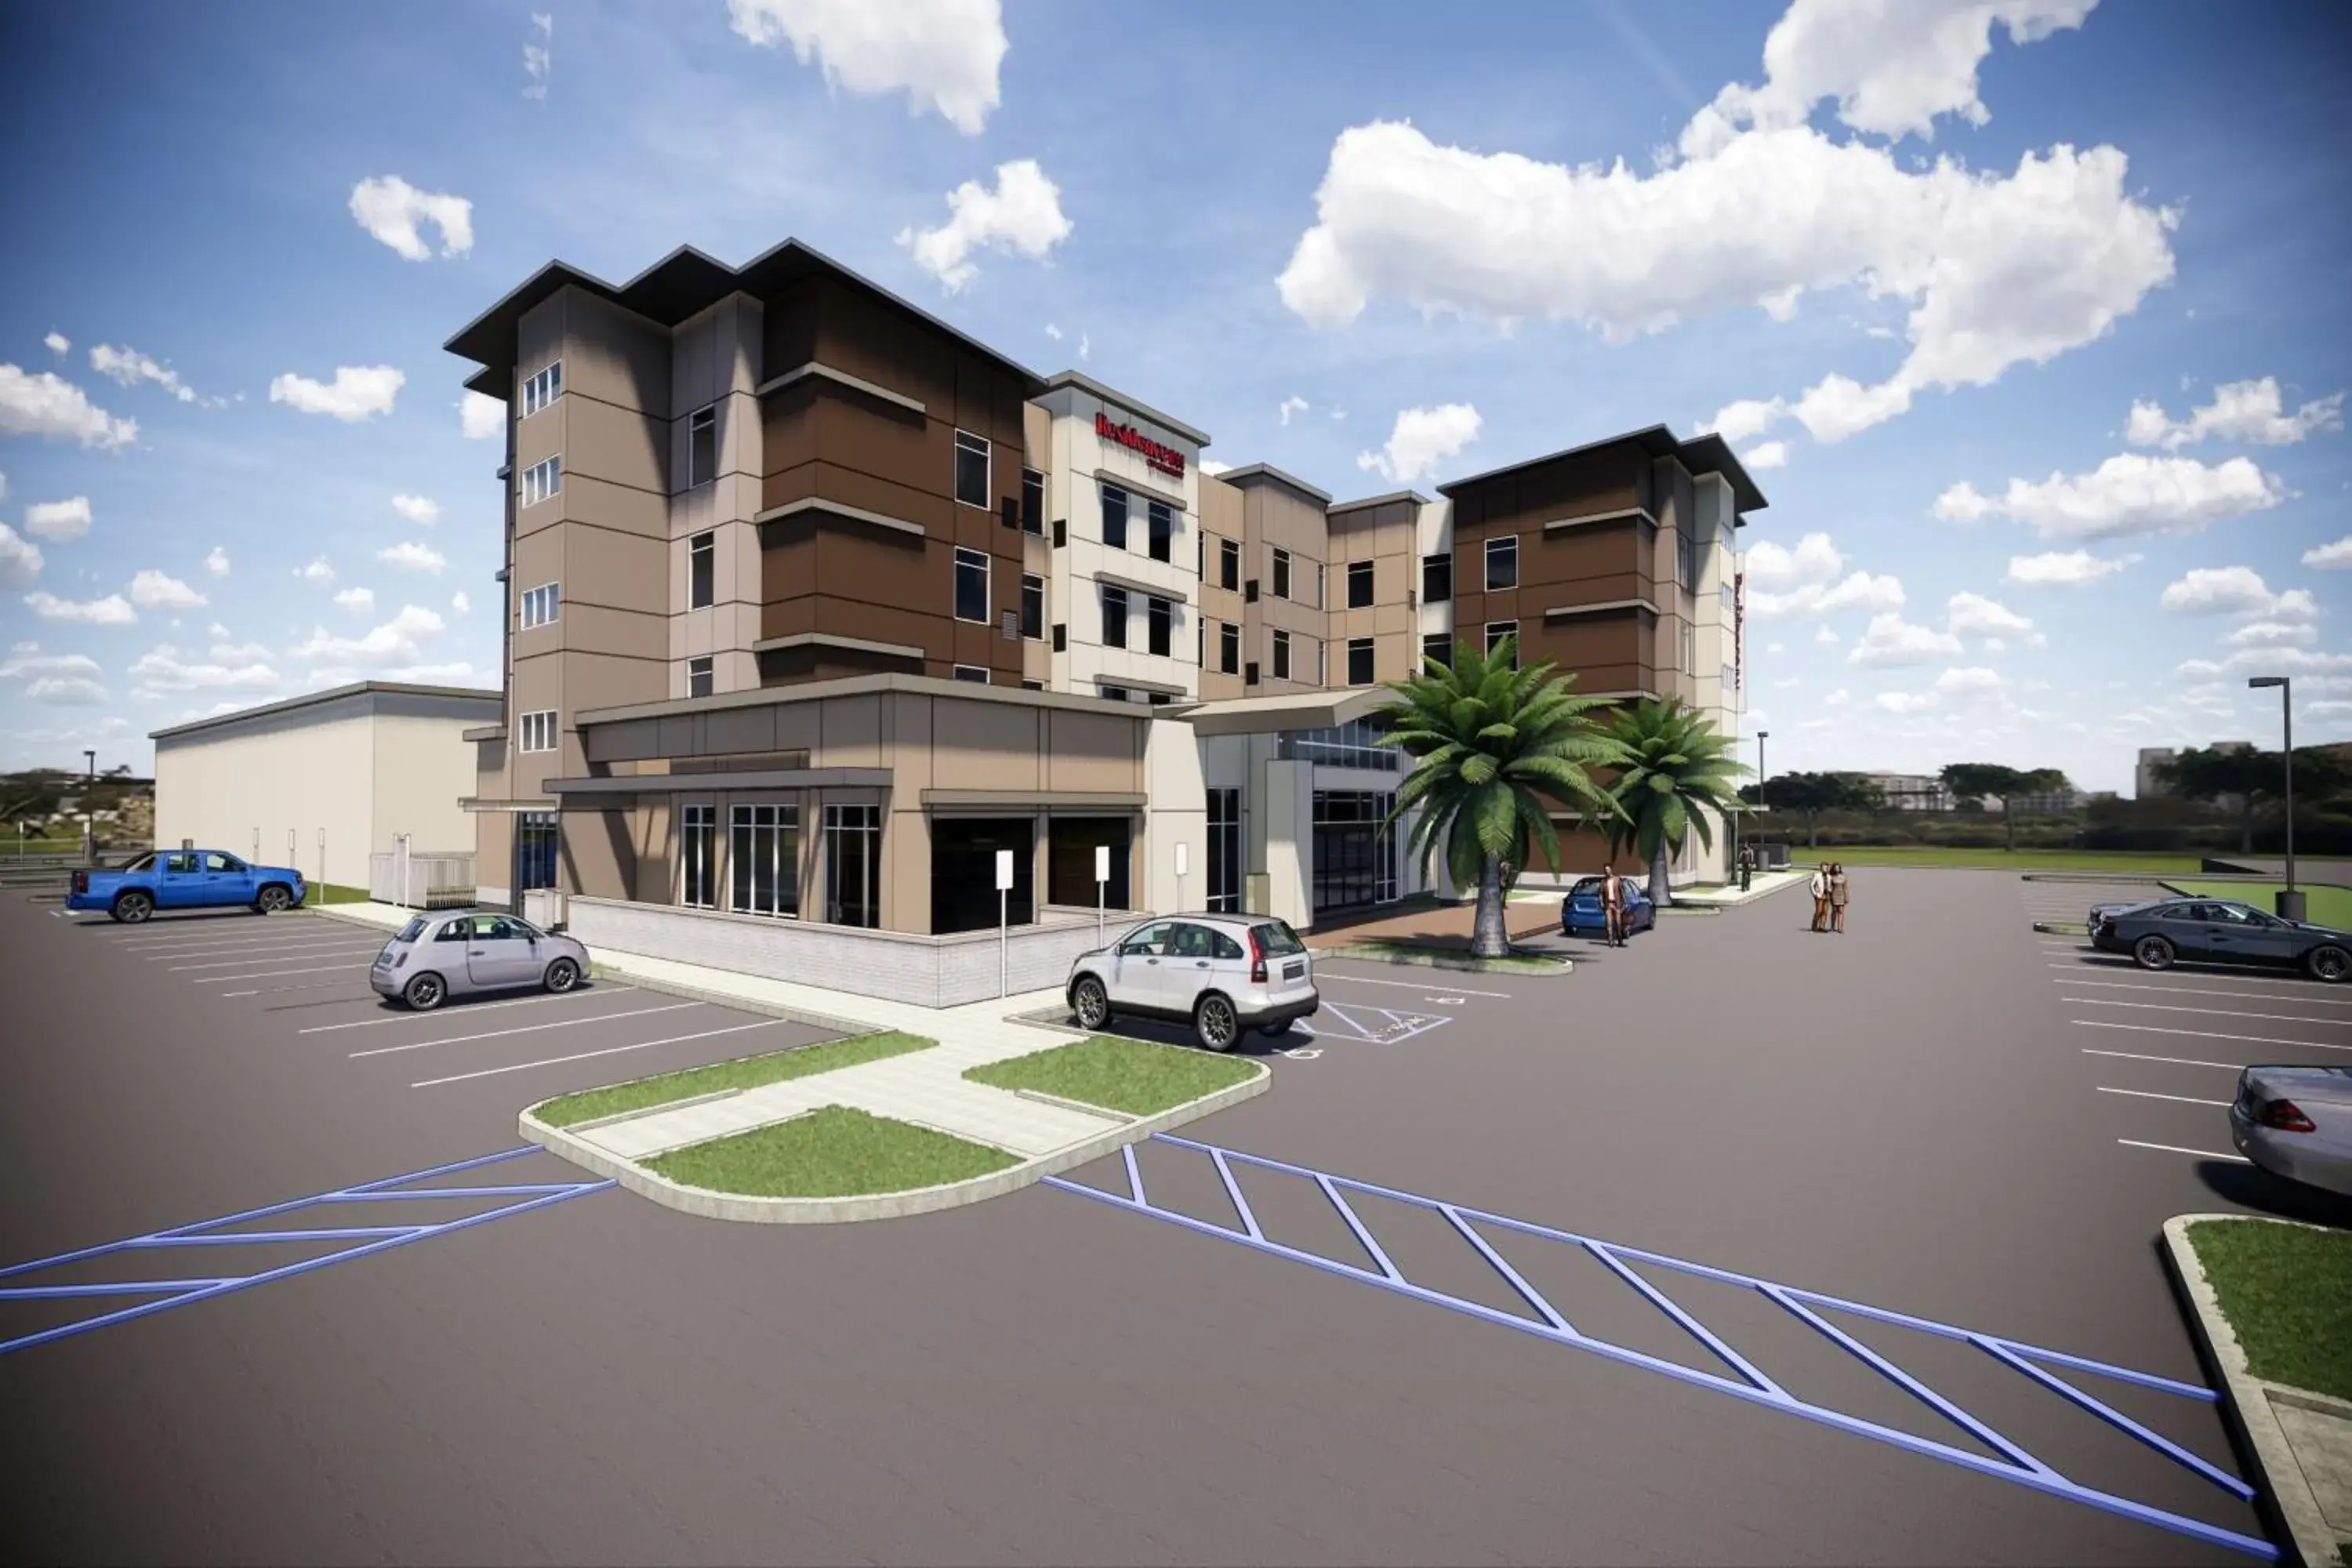 Property Building in Residence Inn by Marriott Chatsworth